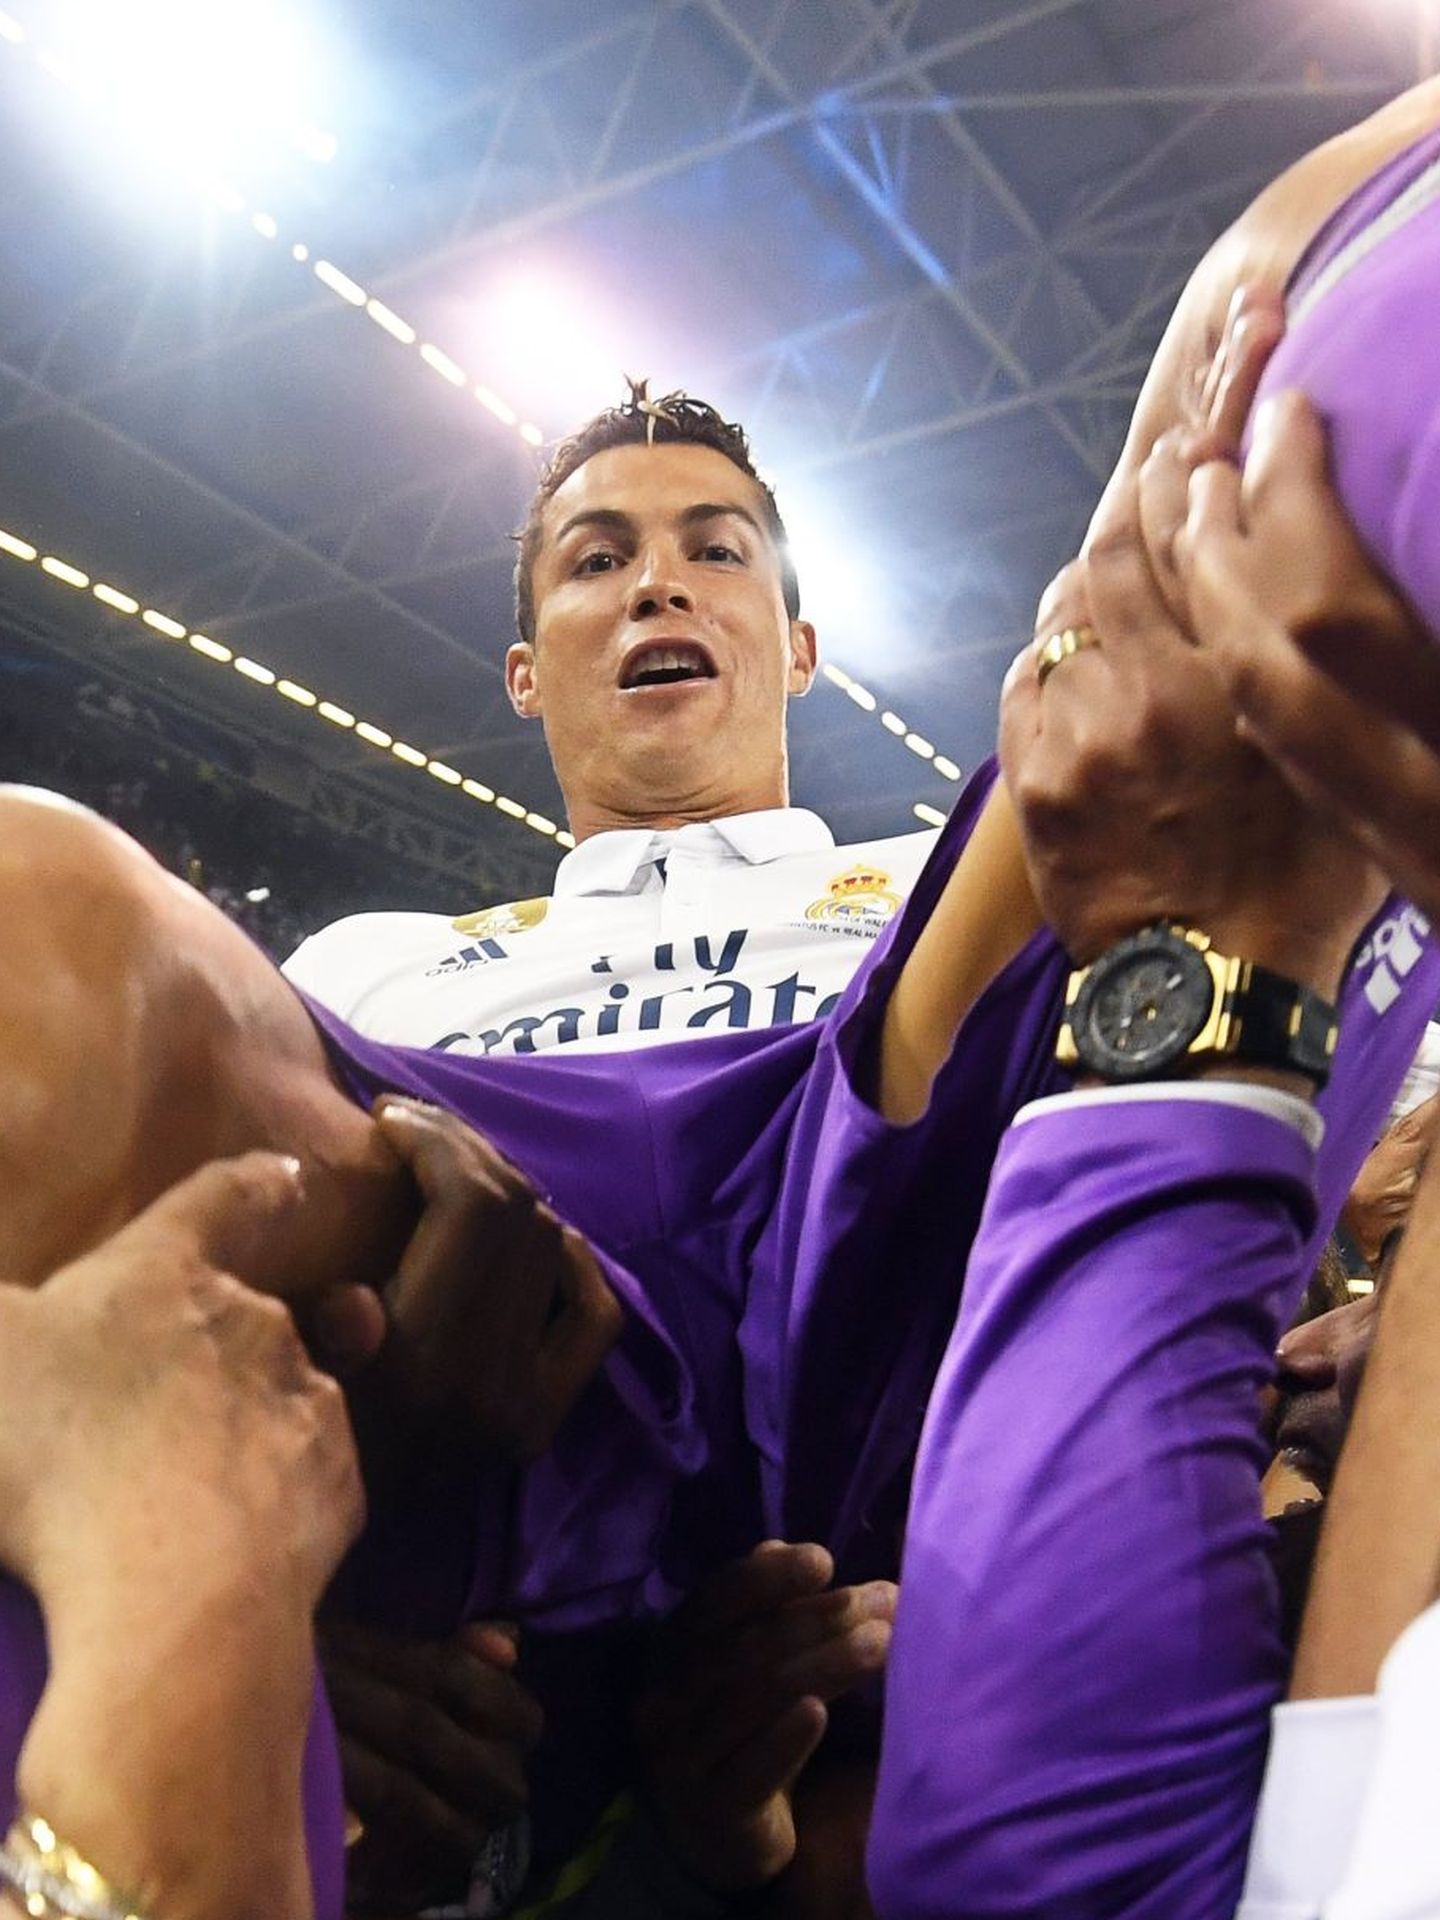 -FOTODELDIA- epa06009062 Real Madrid's Cristiano Ronaldo (C) celebrates with his teammates after the UEFA Champions League final between Juventus FC and Real Madrid at the National Stadium of Wales in Cardiff, Britain, 03 June 2017. Real Madrid won 4-1. EFE FACUNDO ARRIZABALAGA